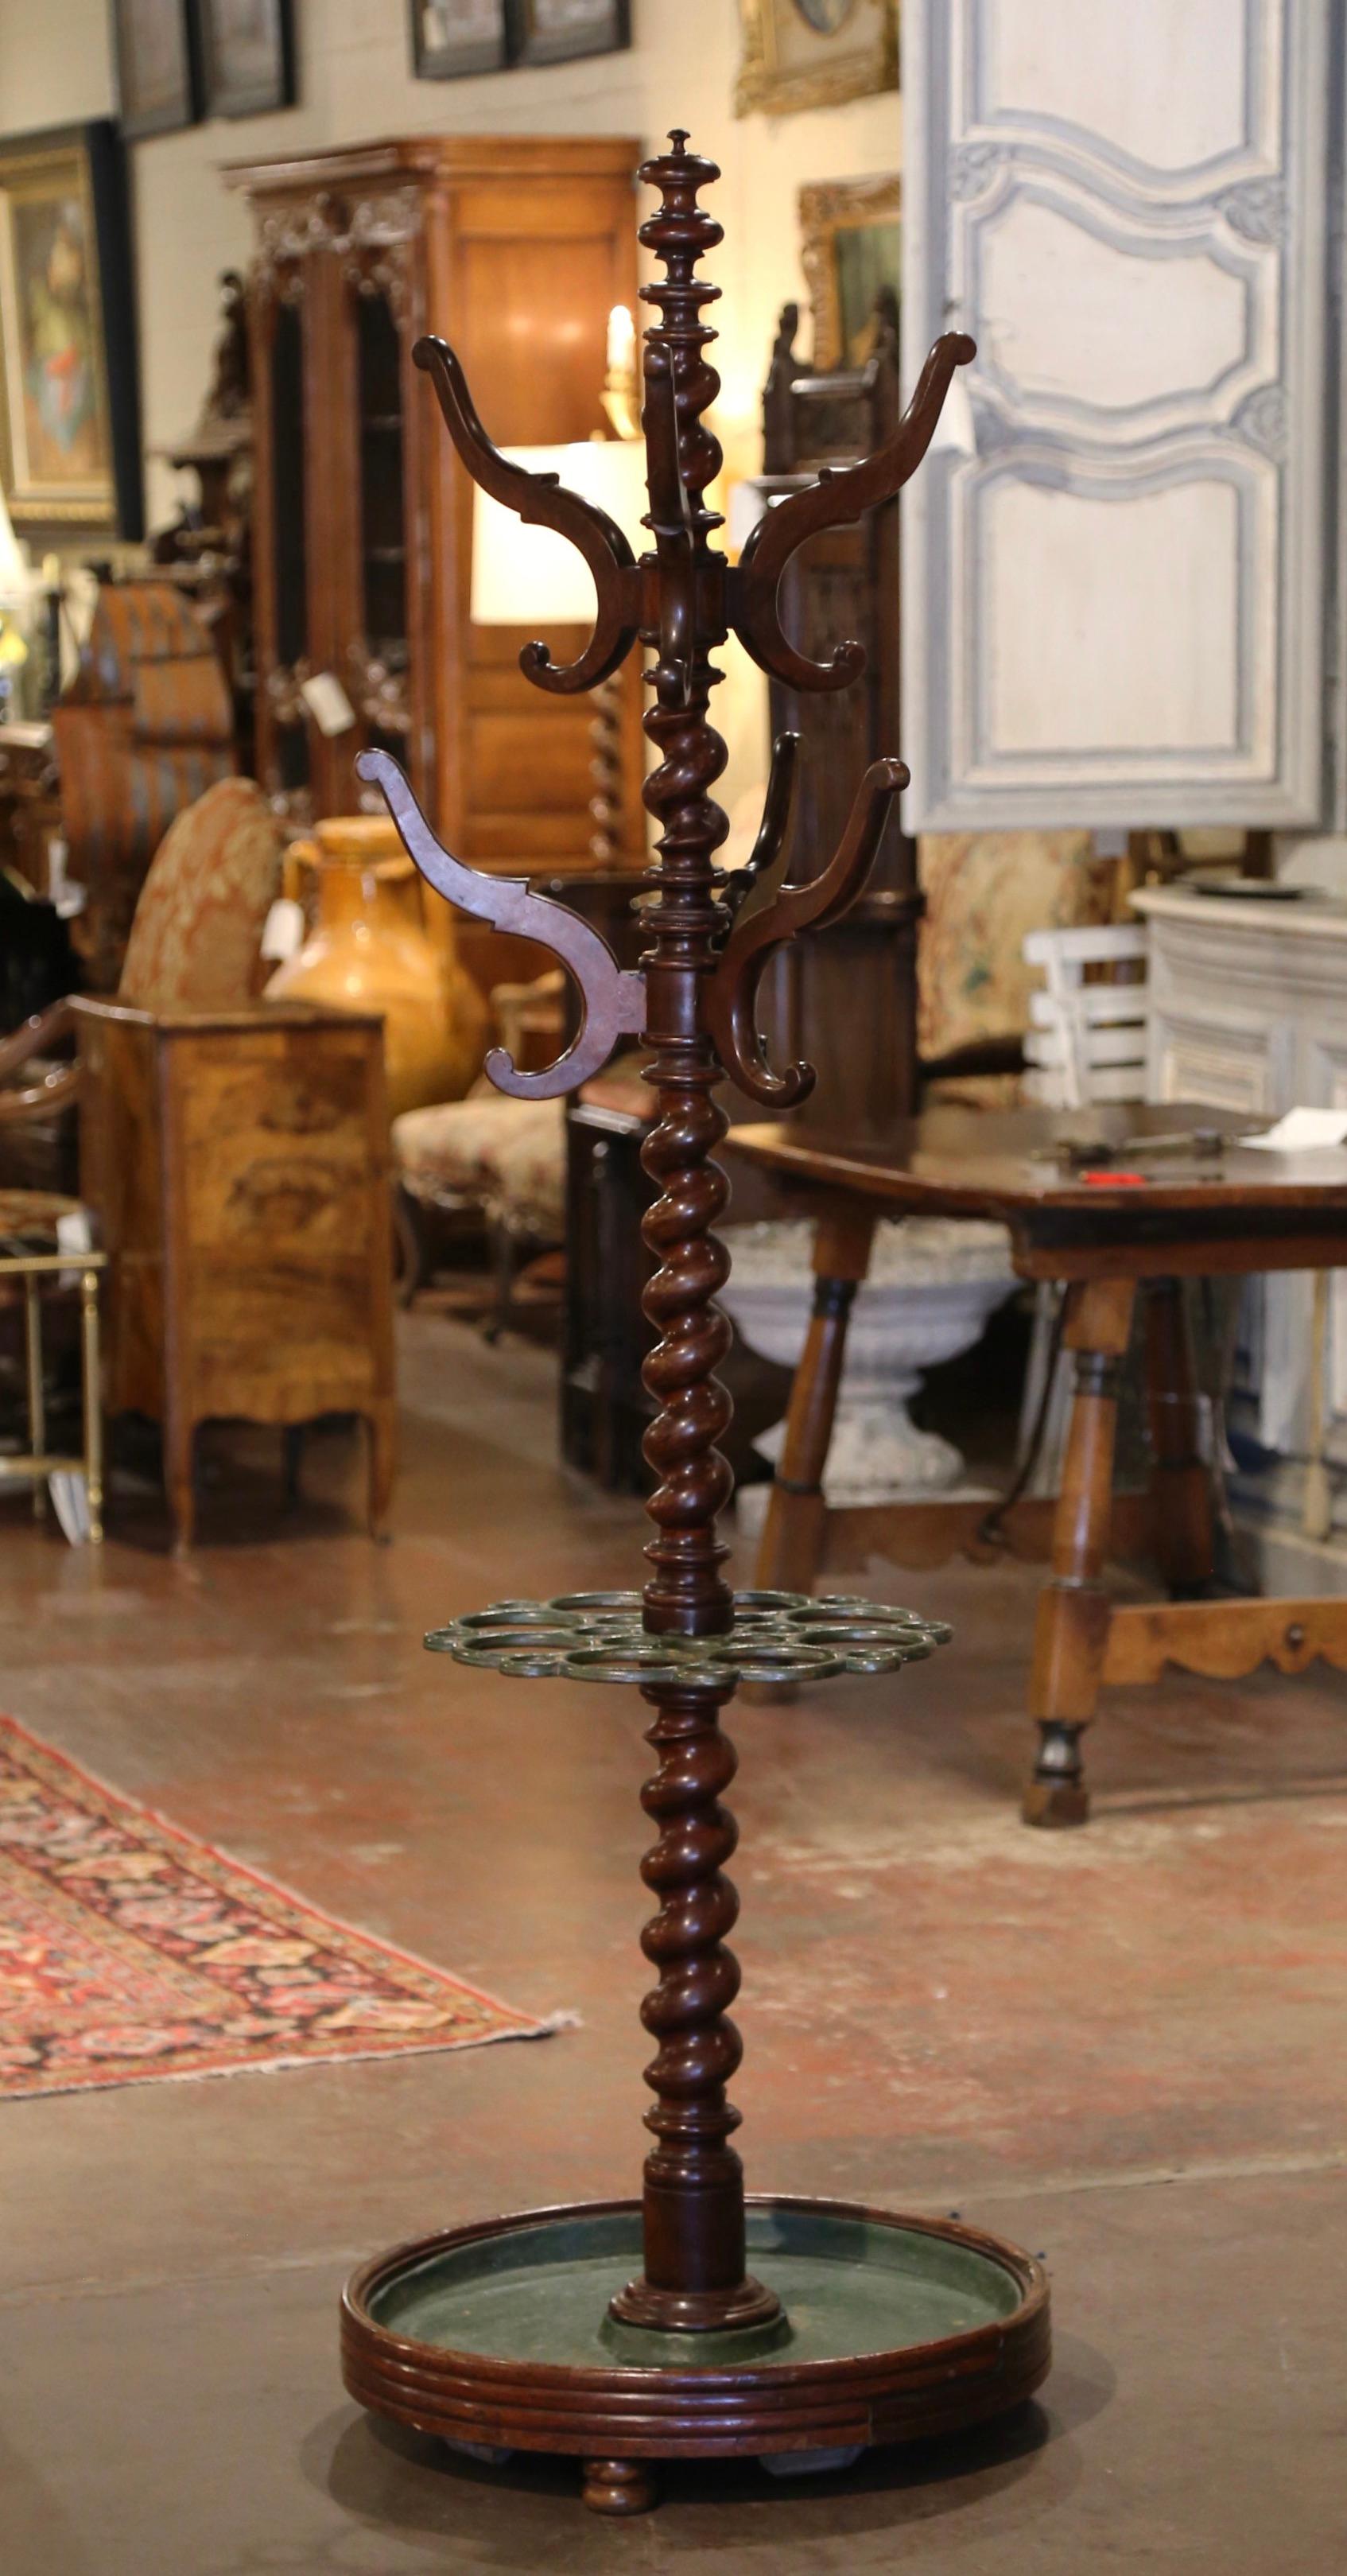 This antique carved fruit wood hall tree was crafted in France, circa 1850. Standing on a circular base ending with bun feet, and dressed with a painted iron droplet tray, the tall rack features a barley twist spiral central stem decorated in the